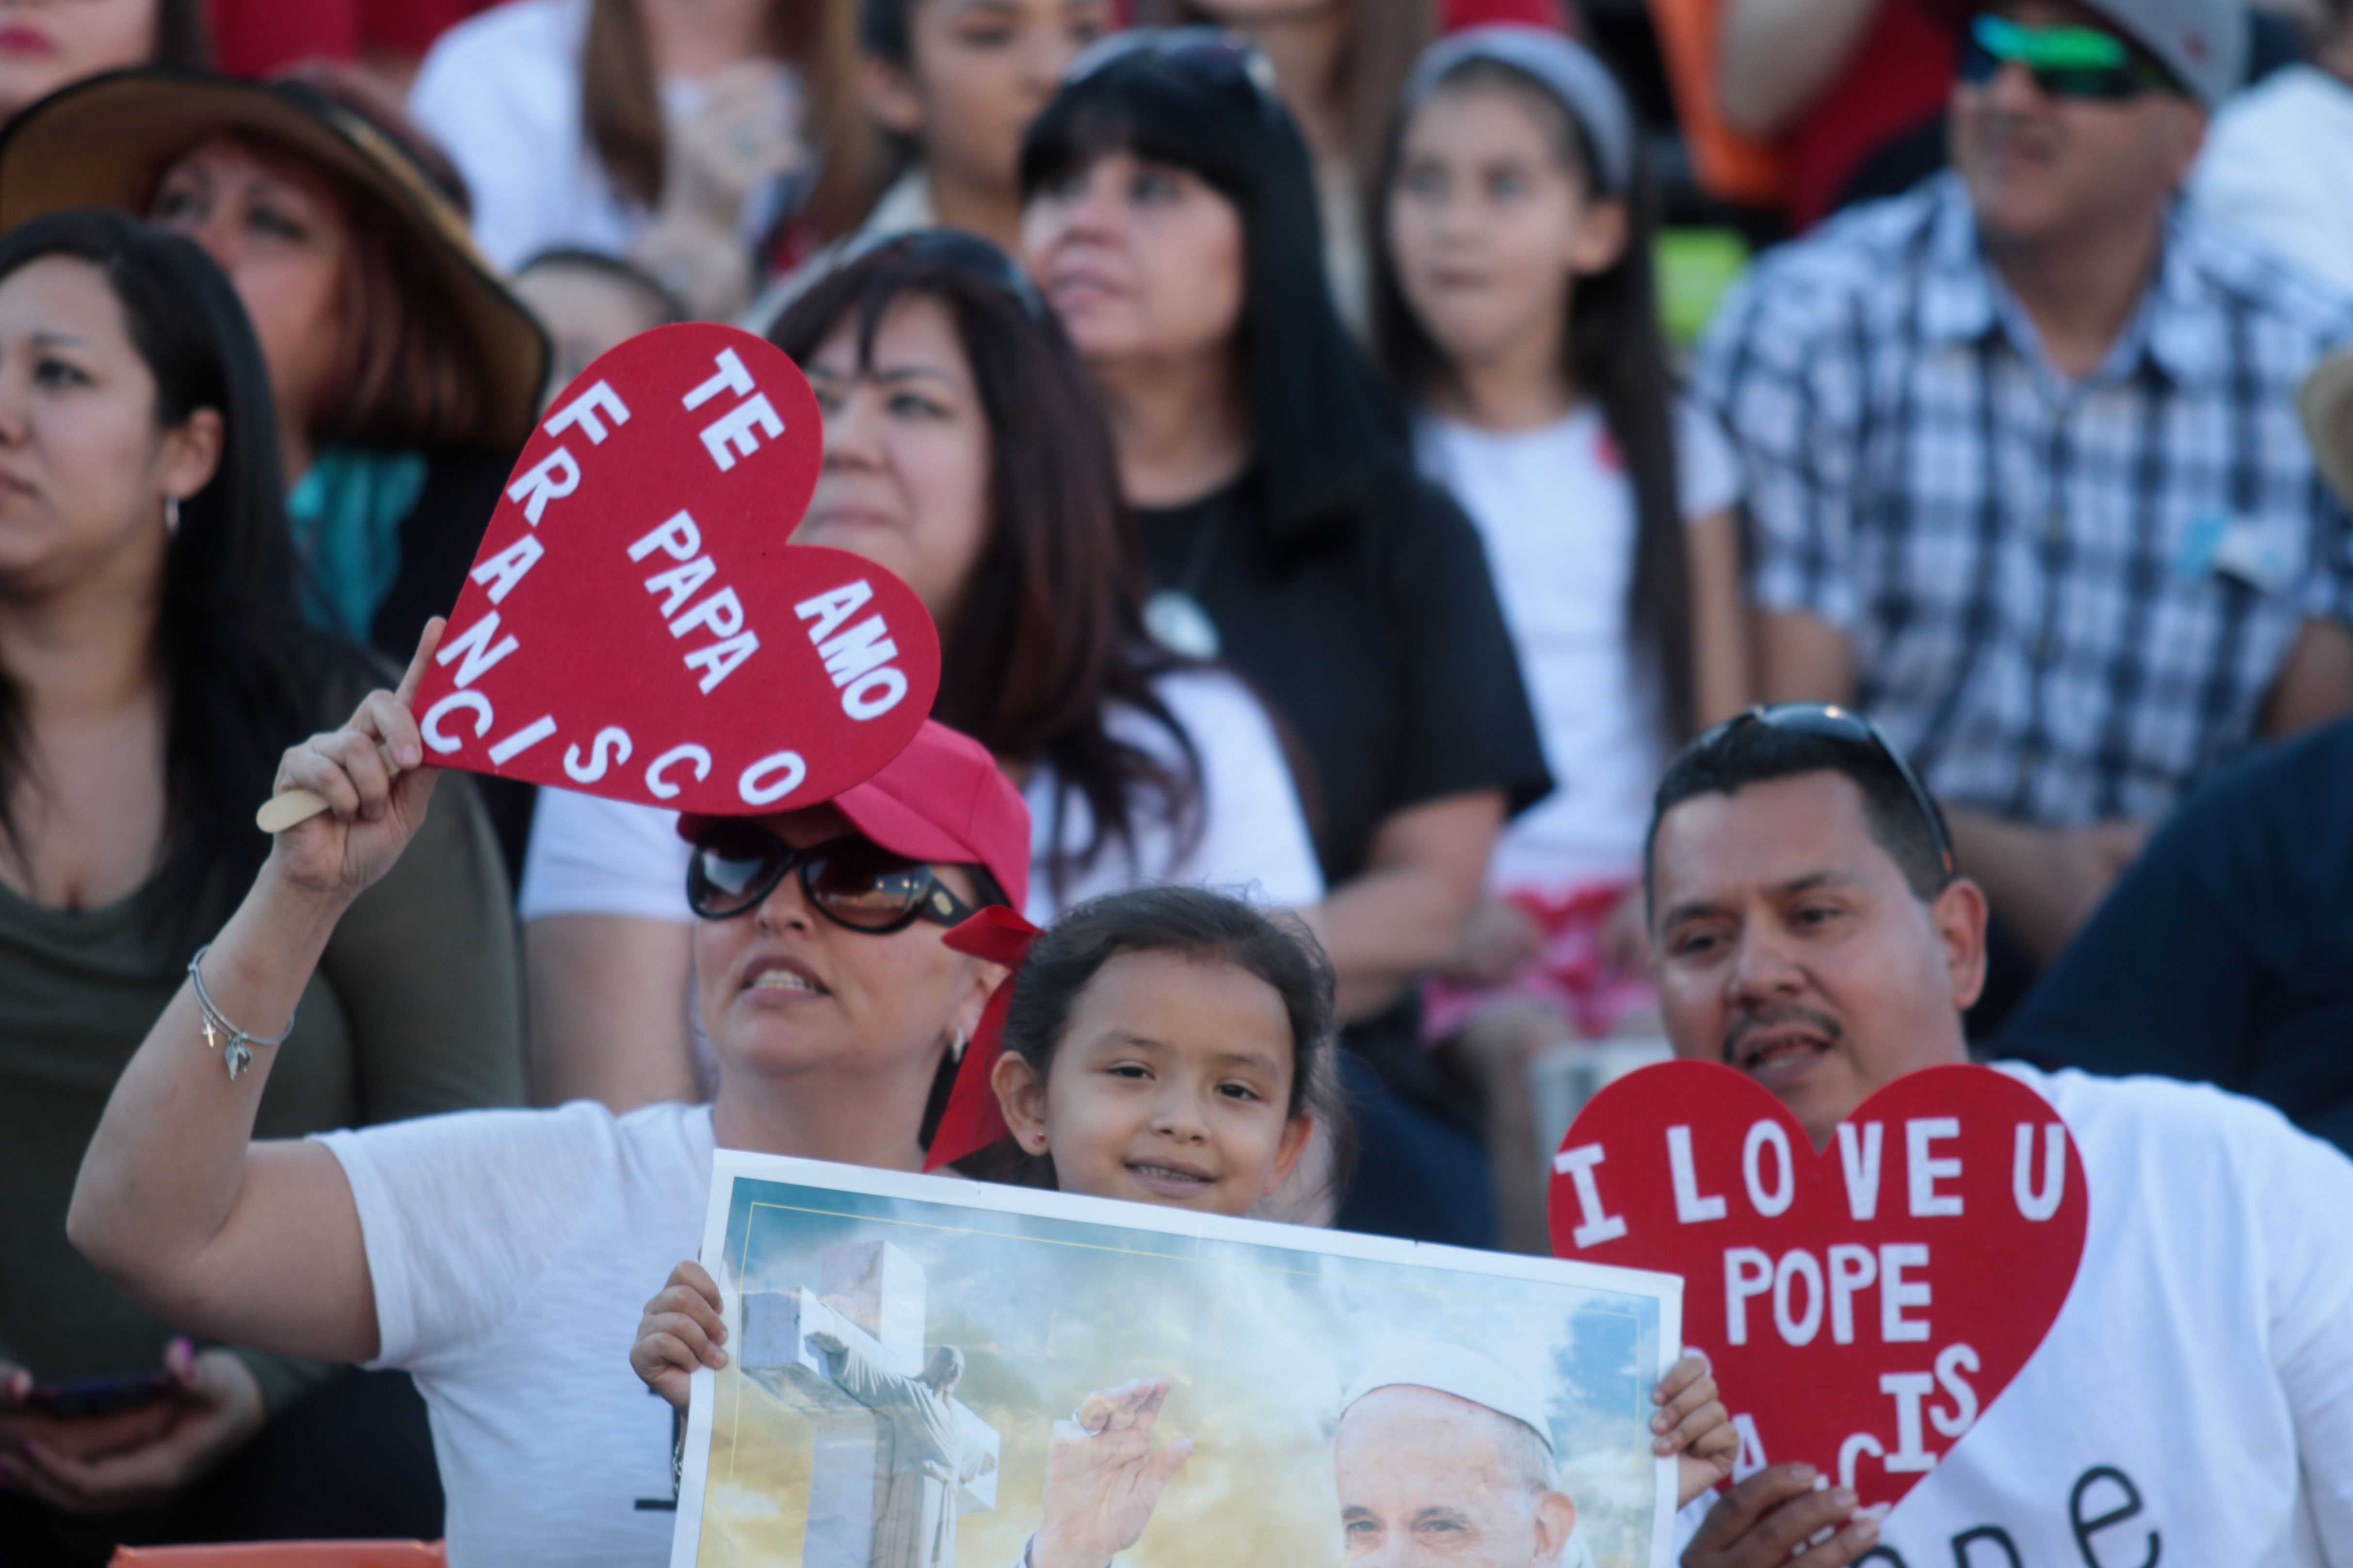 Sun+Bowl+joins+Juarez+in+welcoming+Pope+Francis